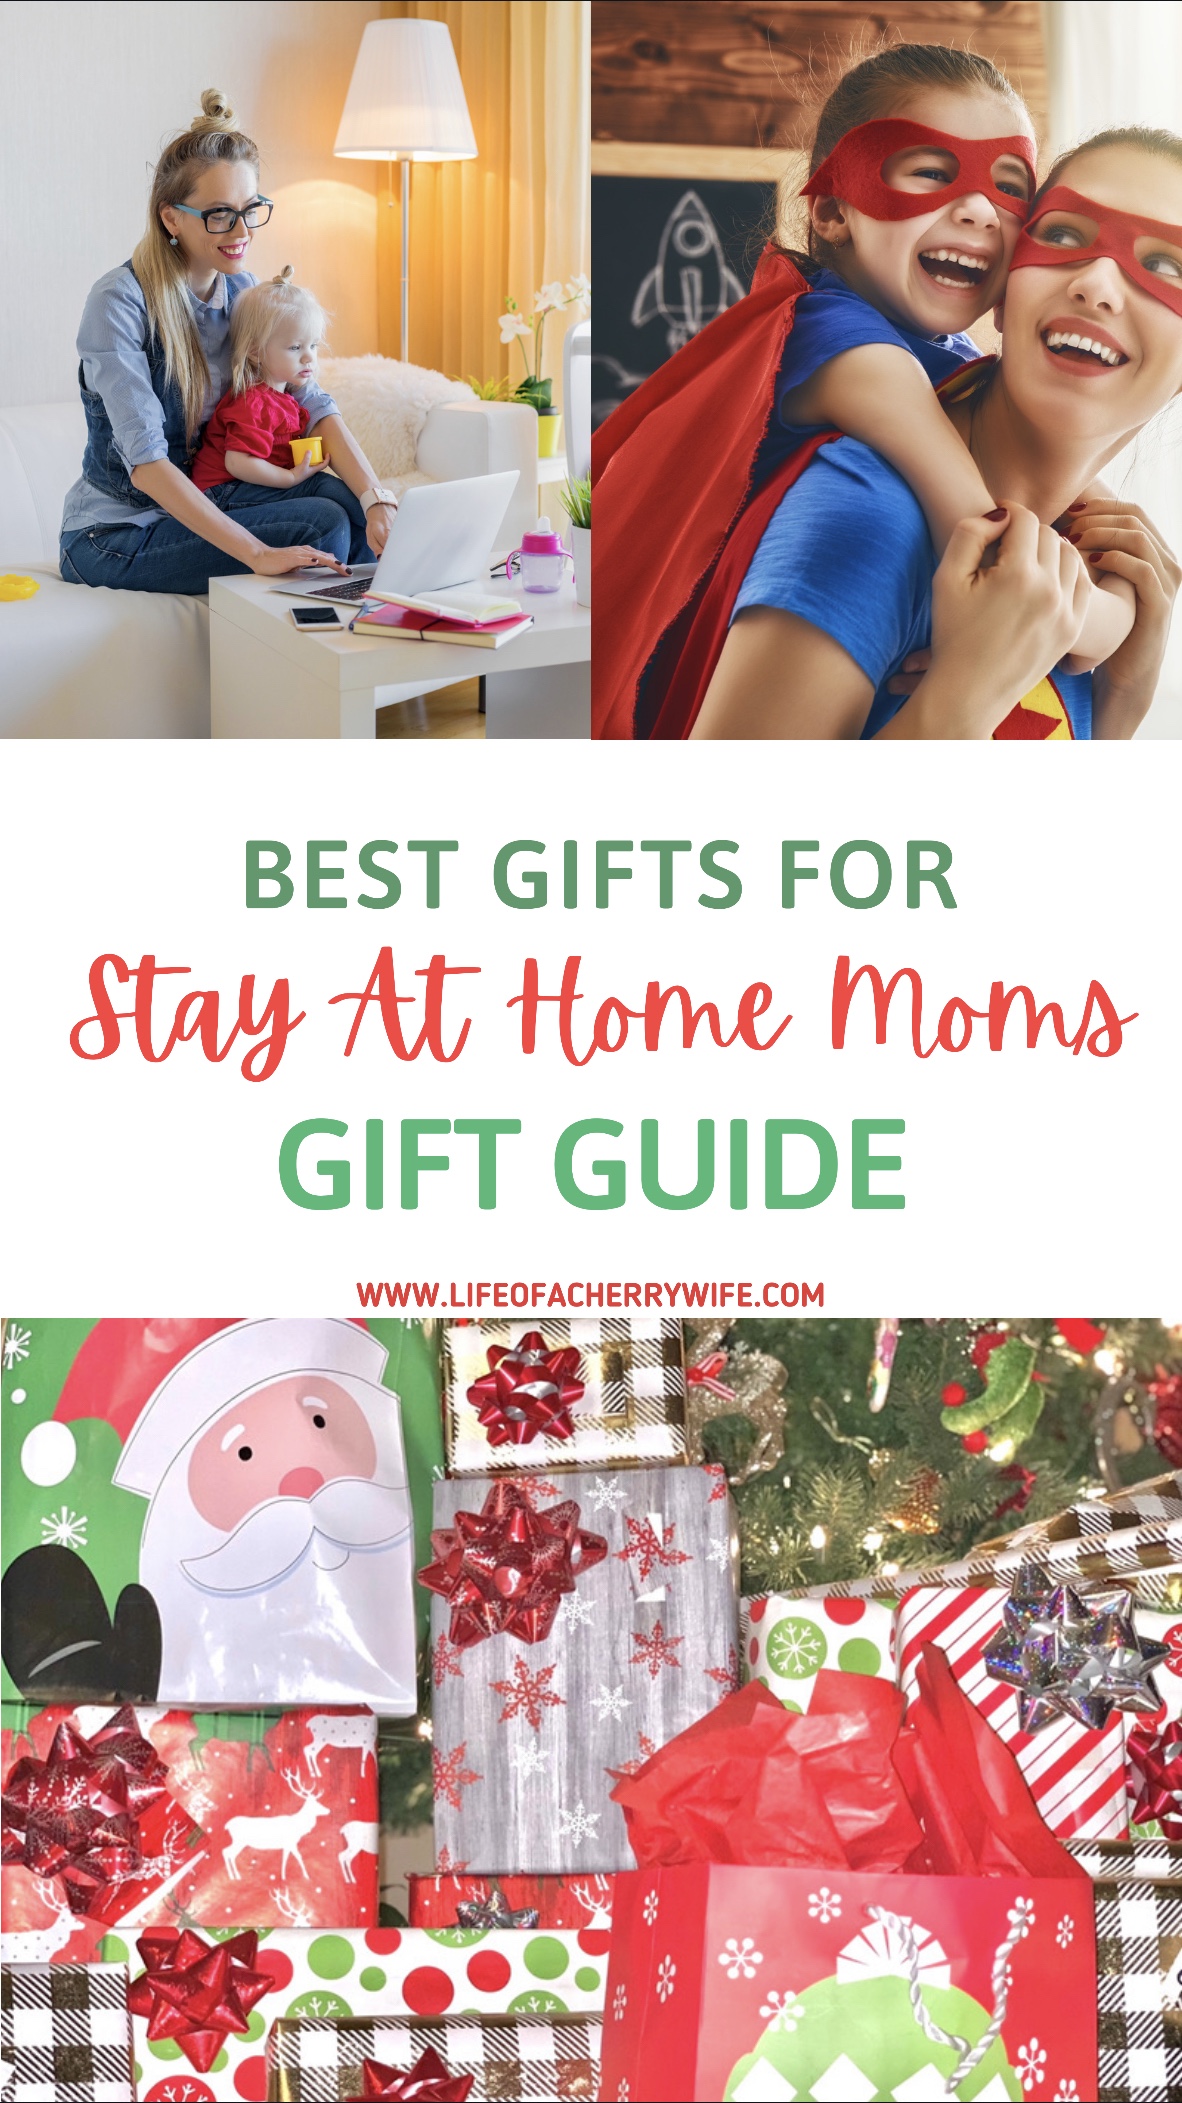 Best Gifts For Stay At Home Moms- Gift Guide, Useful Gifts